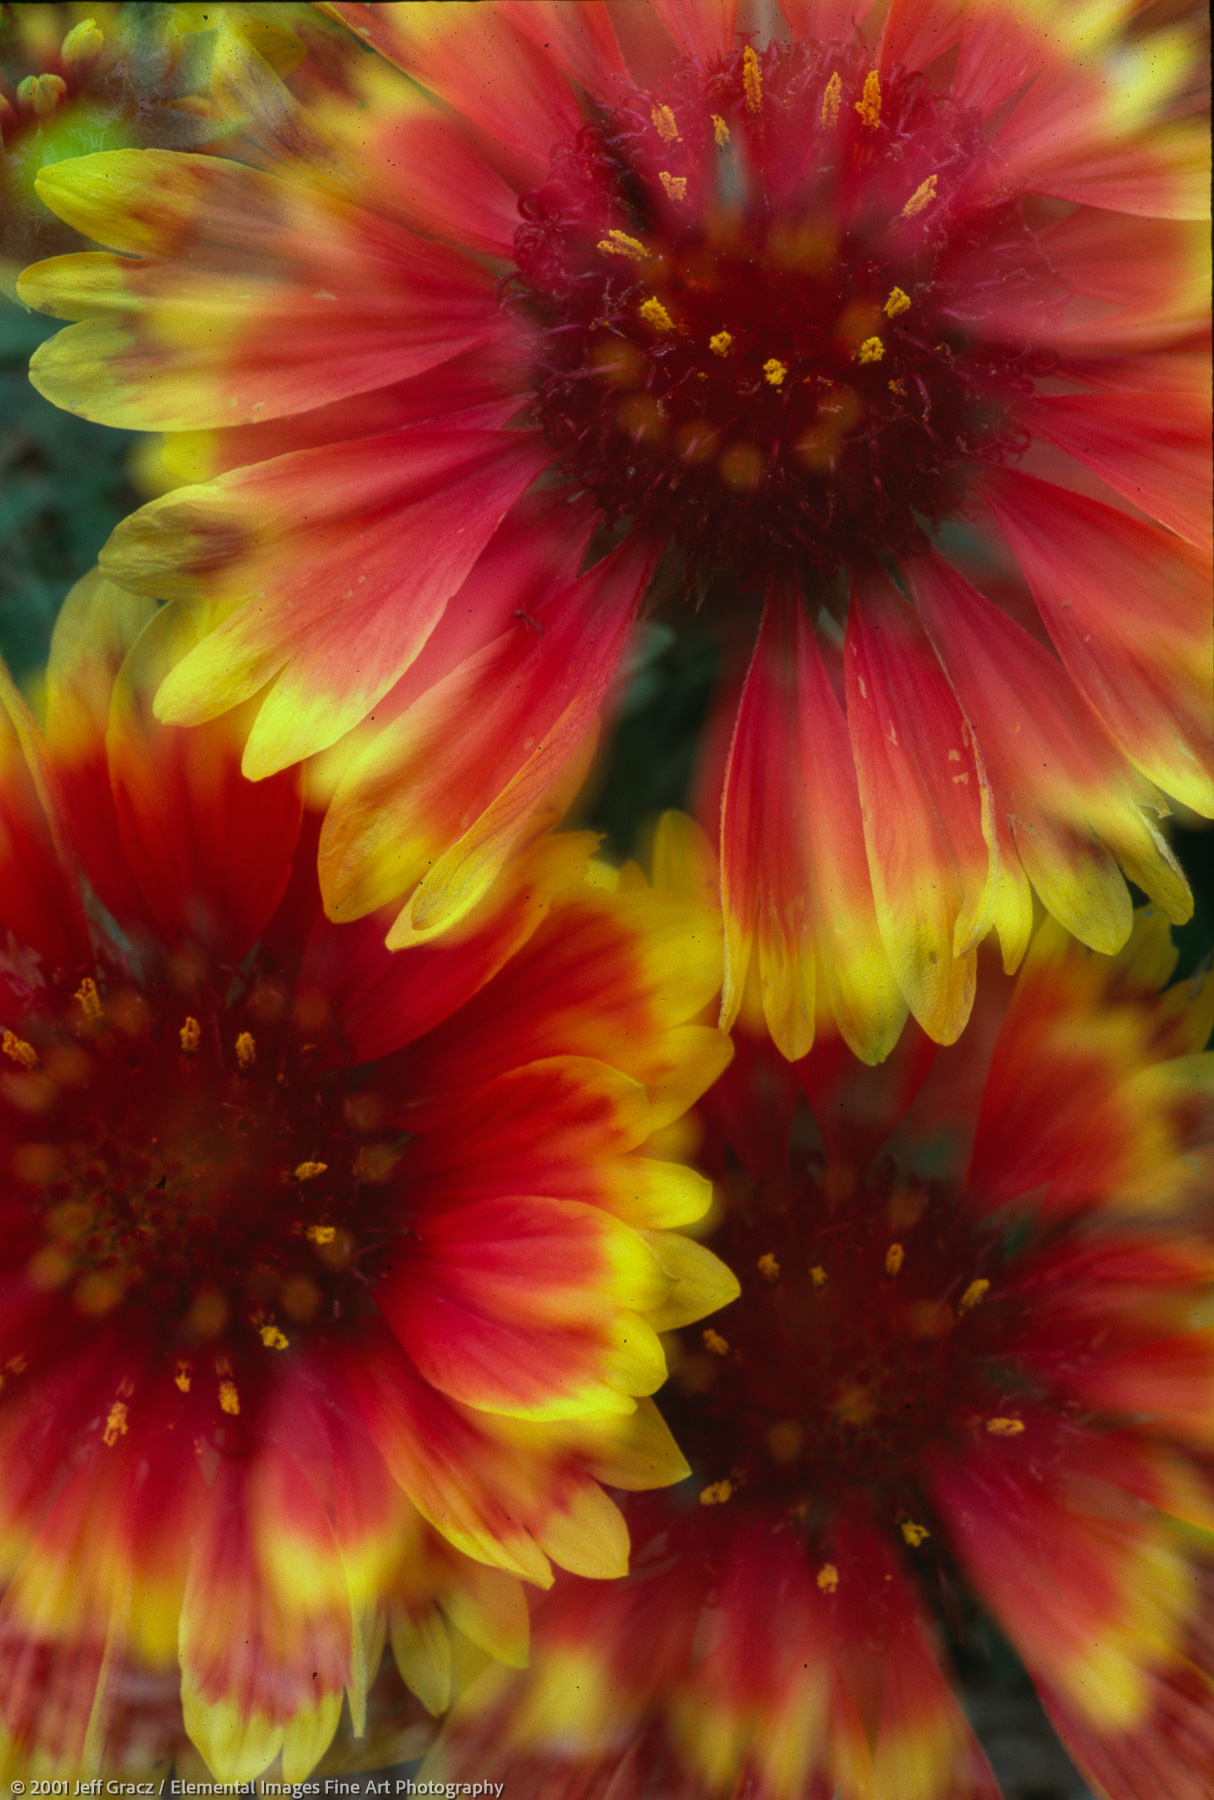 blanket flower double exposure | arcadia | CA | usa - © © 2001 Jeff Gracz / Elemental Images Fine Art Photography - All Rights Reserved Worldwide